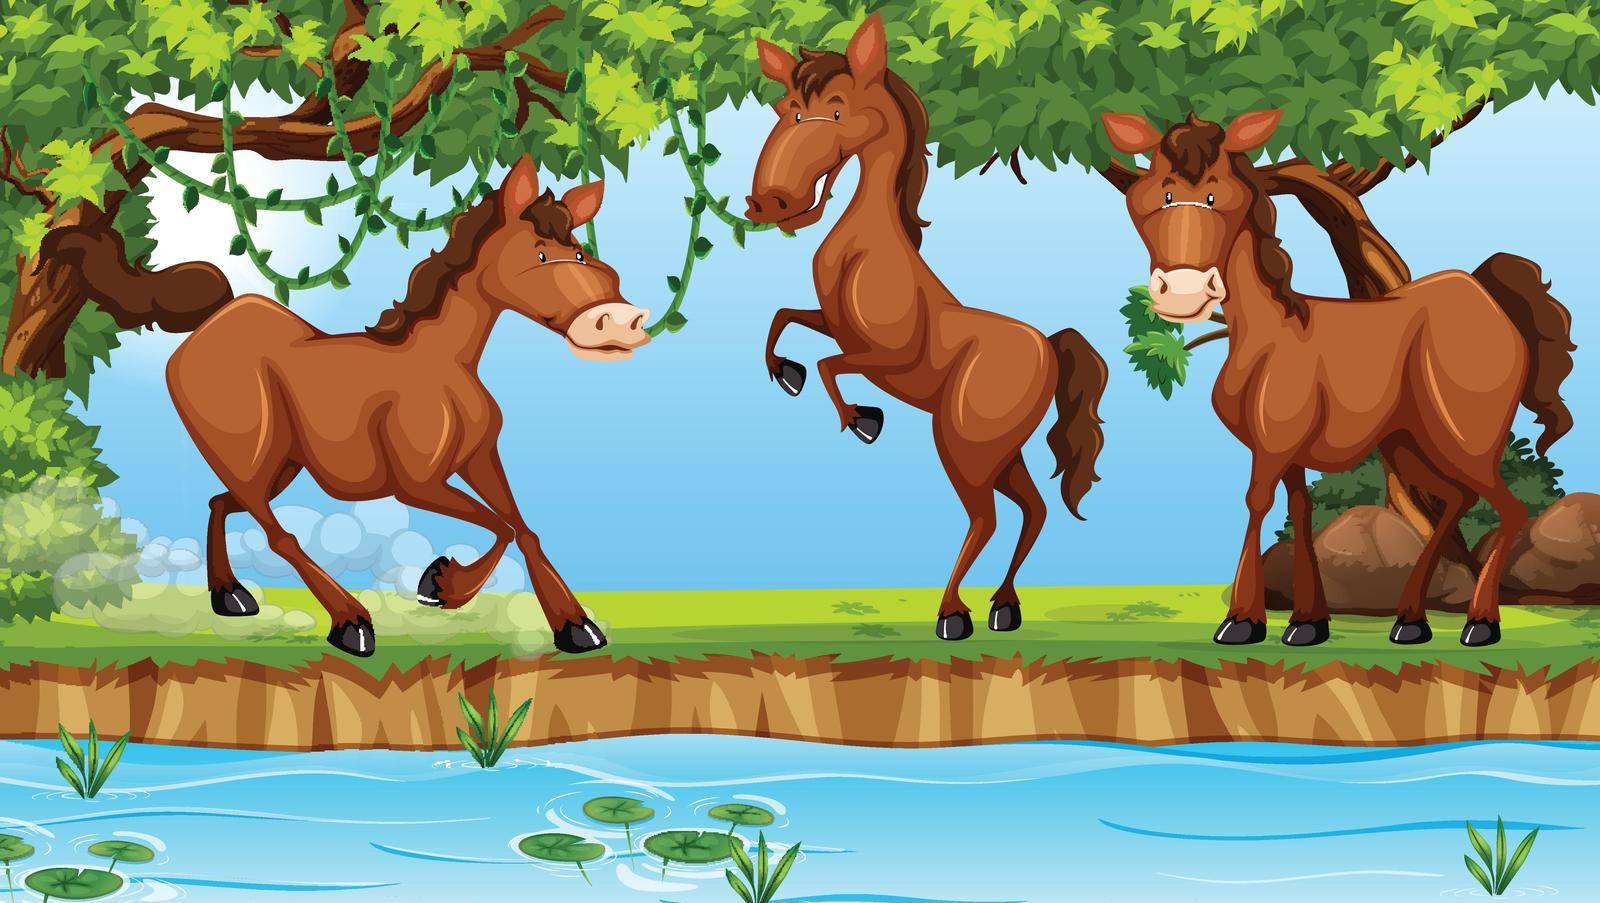 Horses in the nature illustration